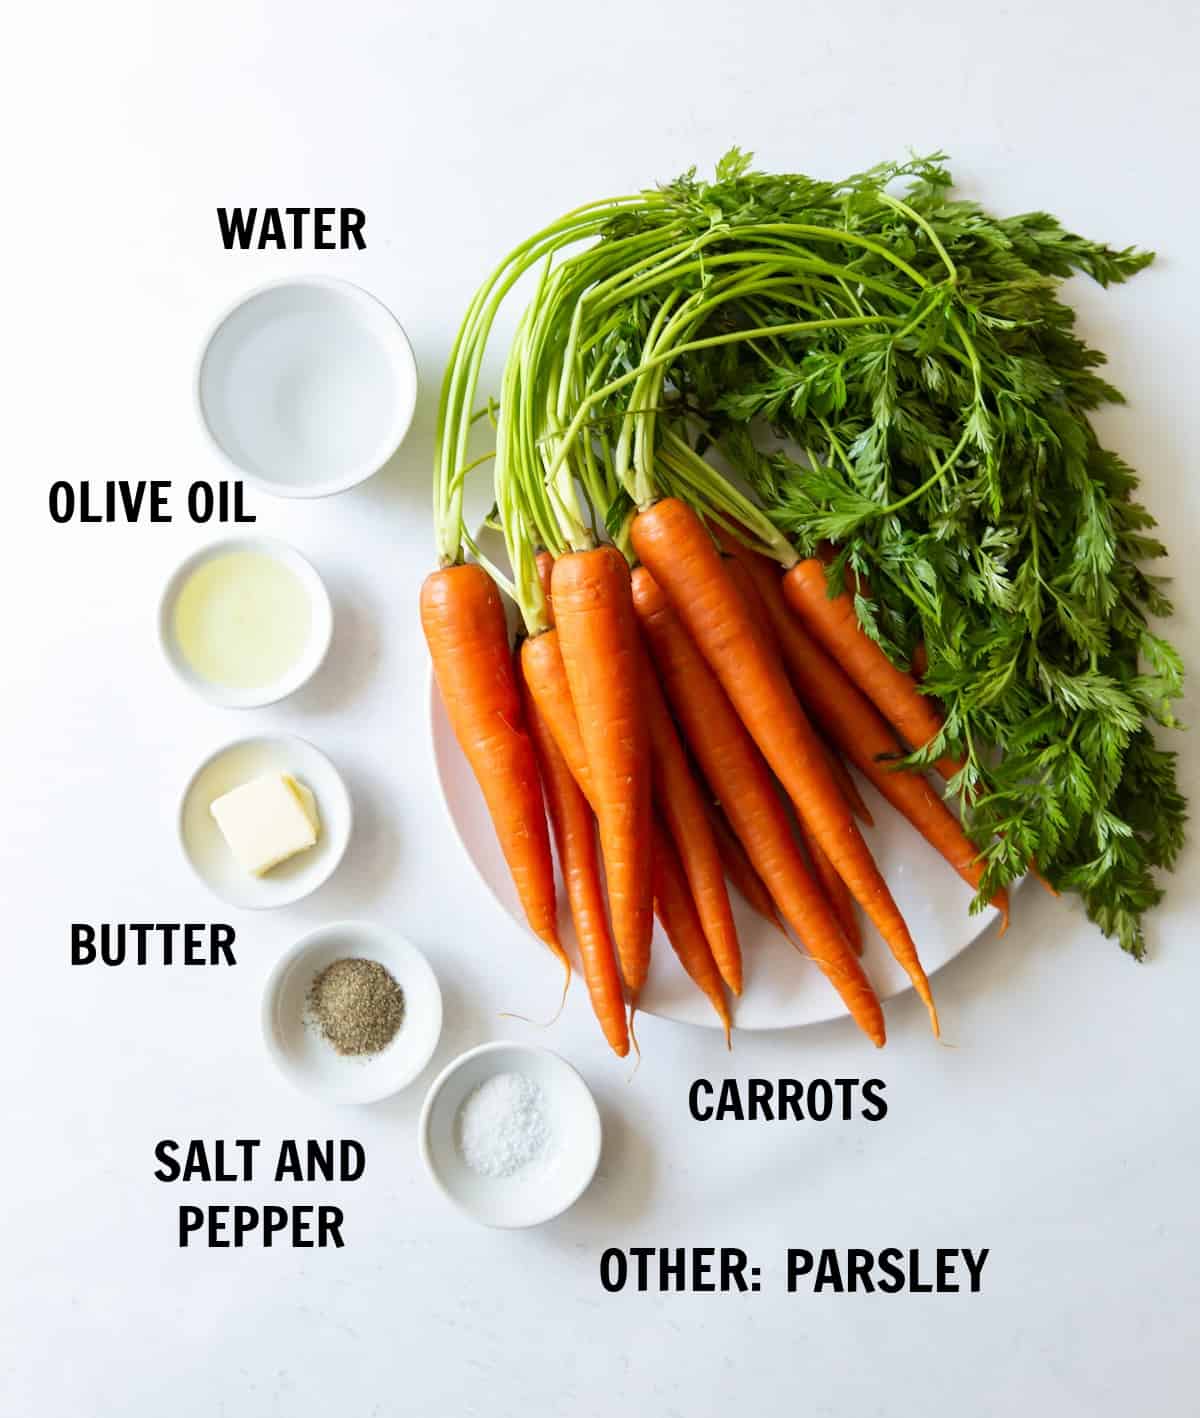 Sauteed carrots ingredients measured out into white dishes